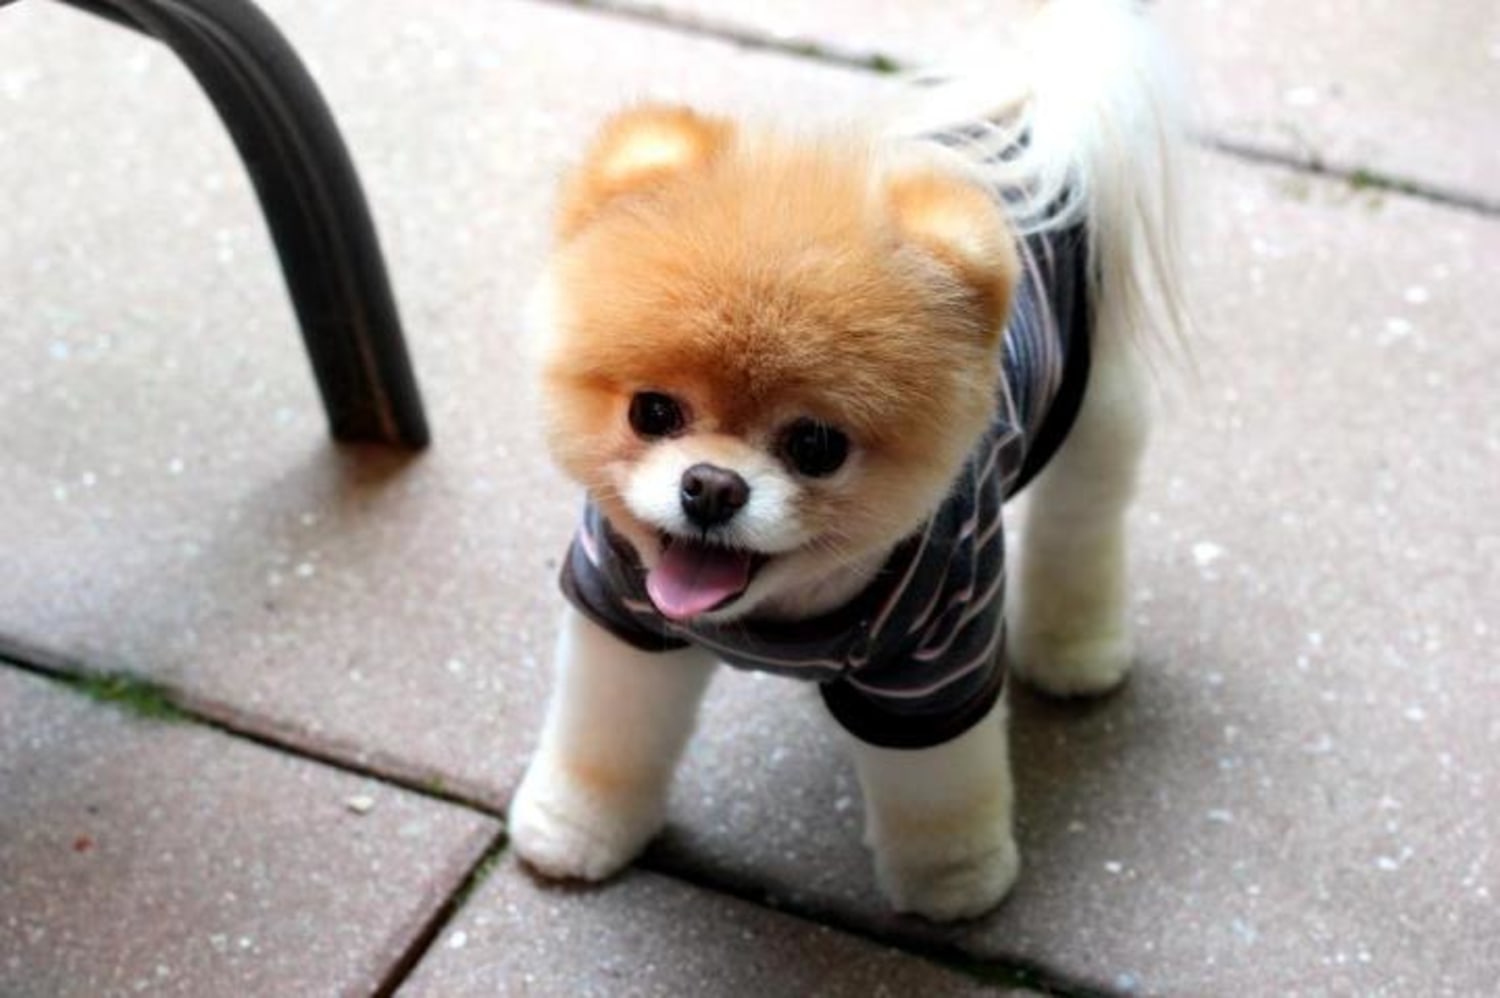 kupon Penge gummi Mellemøsten Is Boo the 'cutest dog' in the world a Facebook plant?